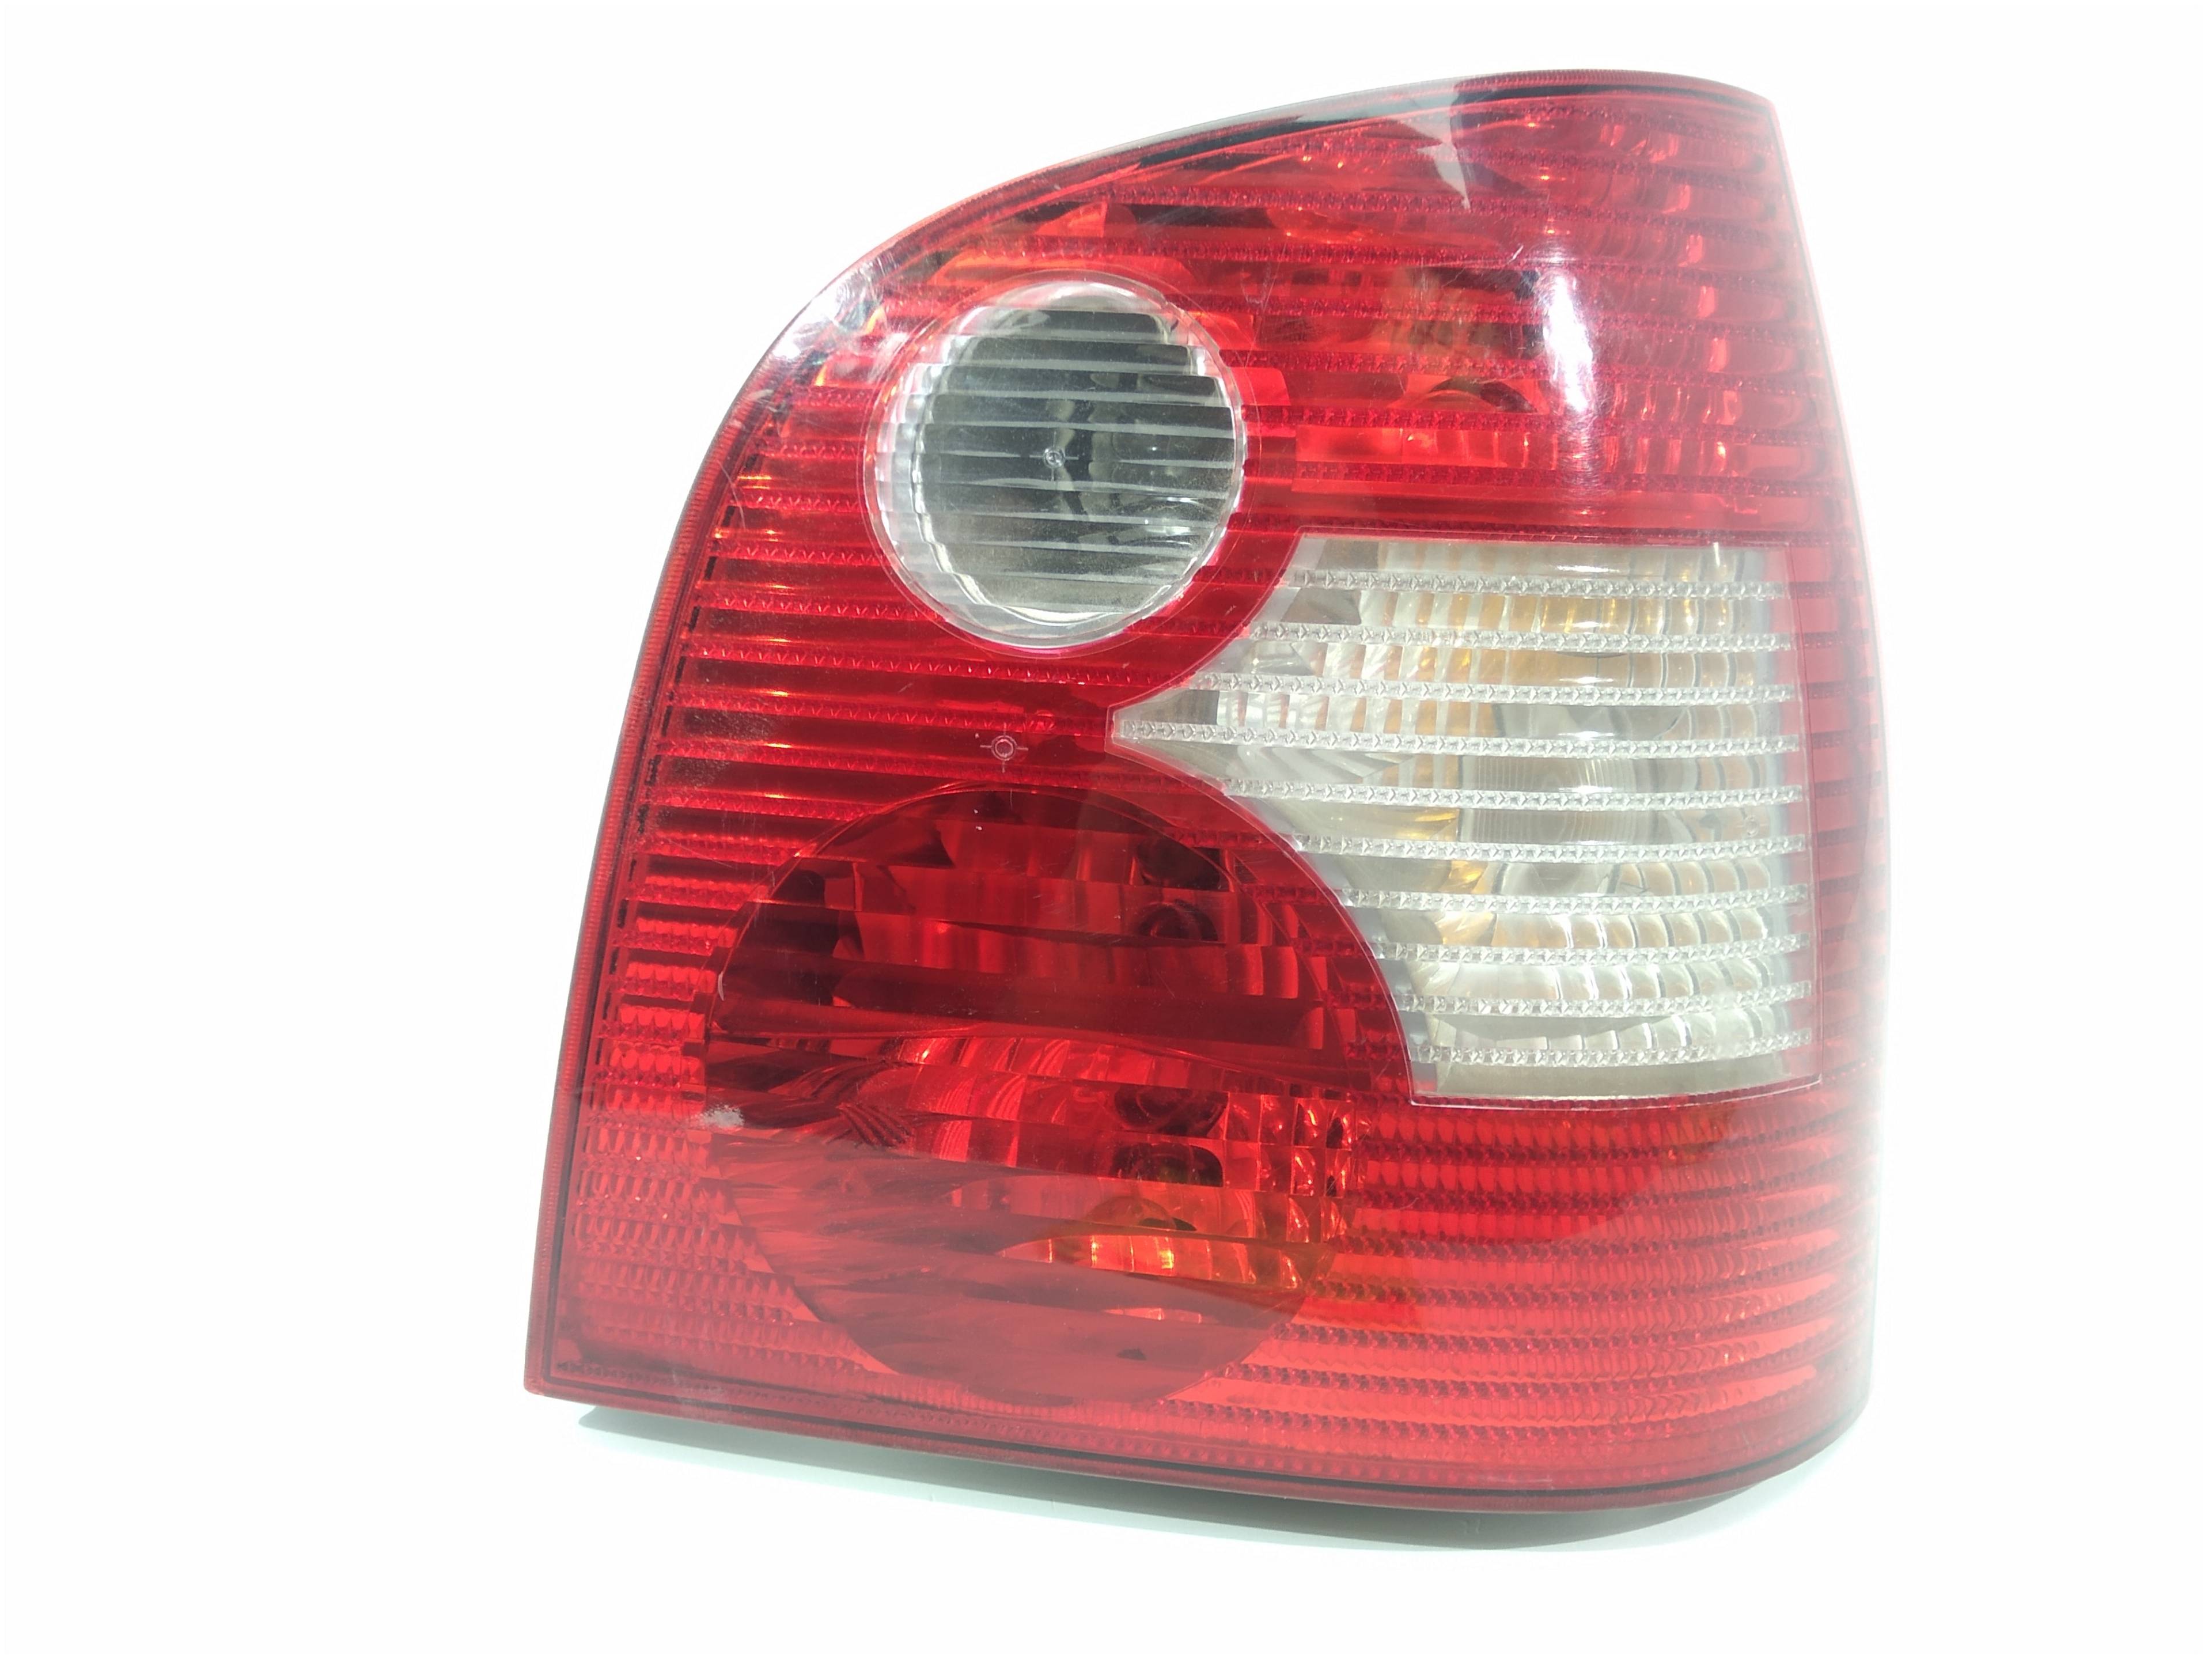 VOLKSWAGEN Polo 4 generation (2001-2009) Rear Right Taillight Lamp 6Q6945258A, 6Q6945258A, 6Q6945258A 19325822